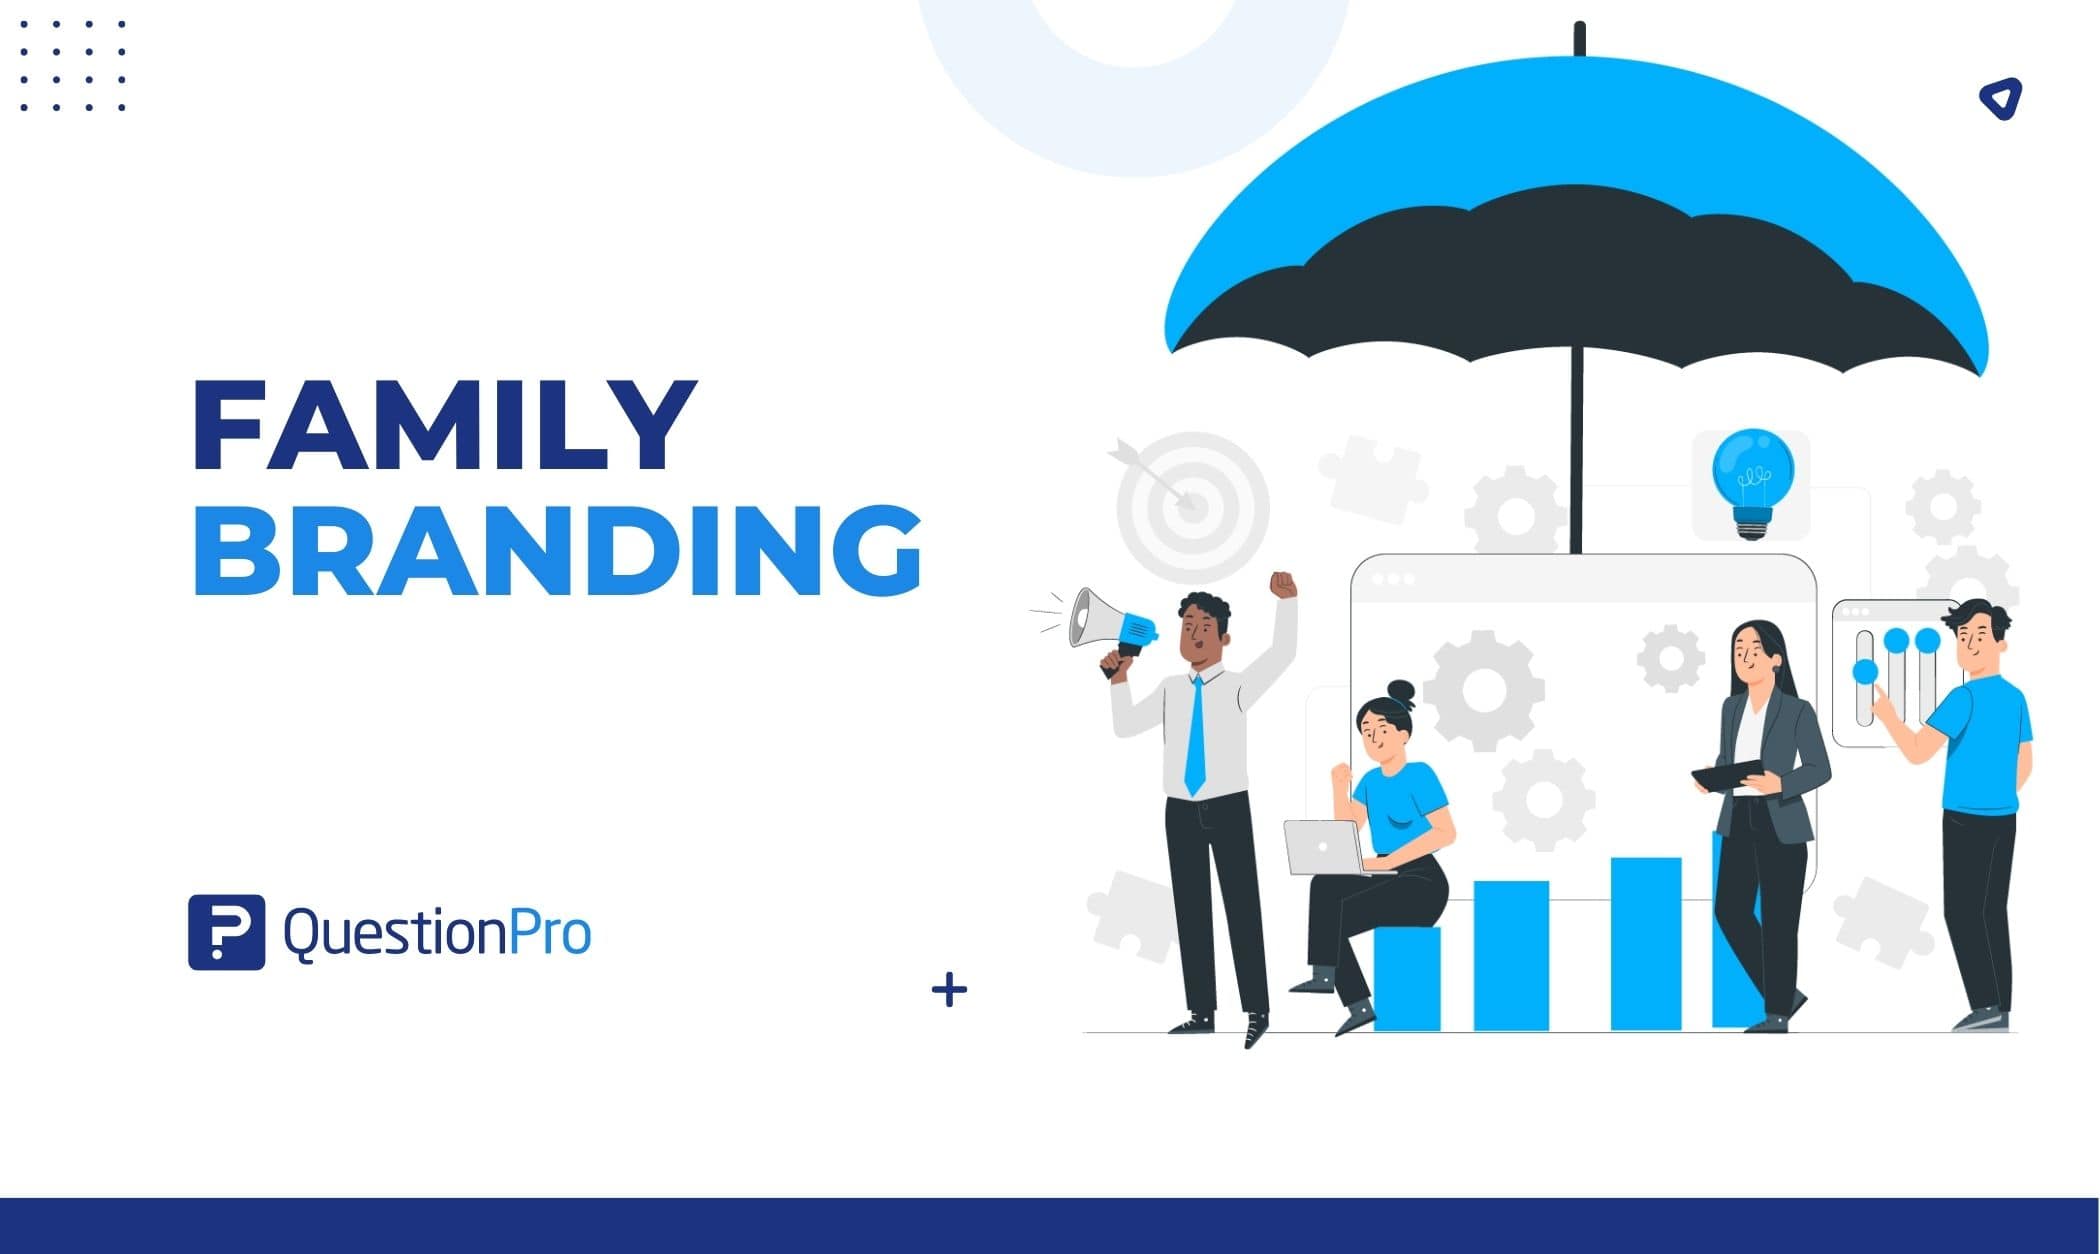 Family branding promotes a set of items or a product line under one parent brand name. It's one of many marketing strategies.